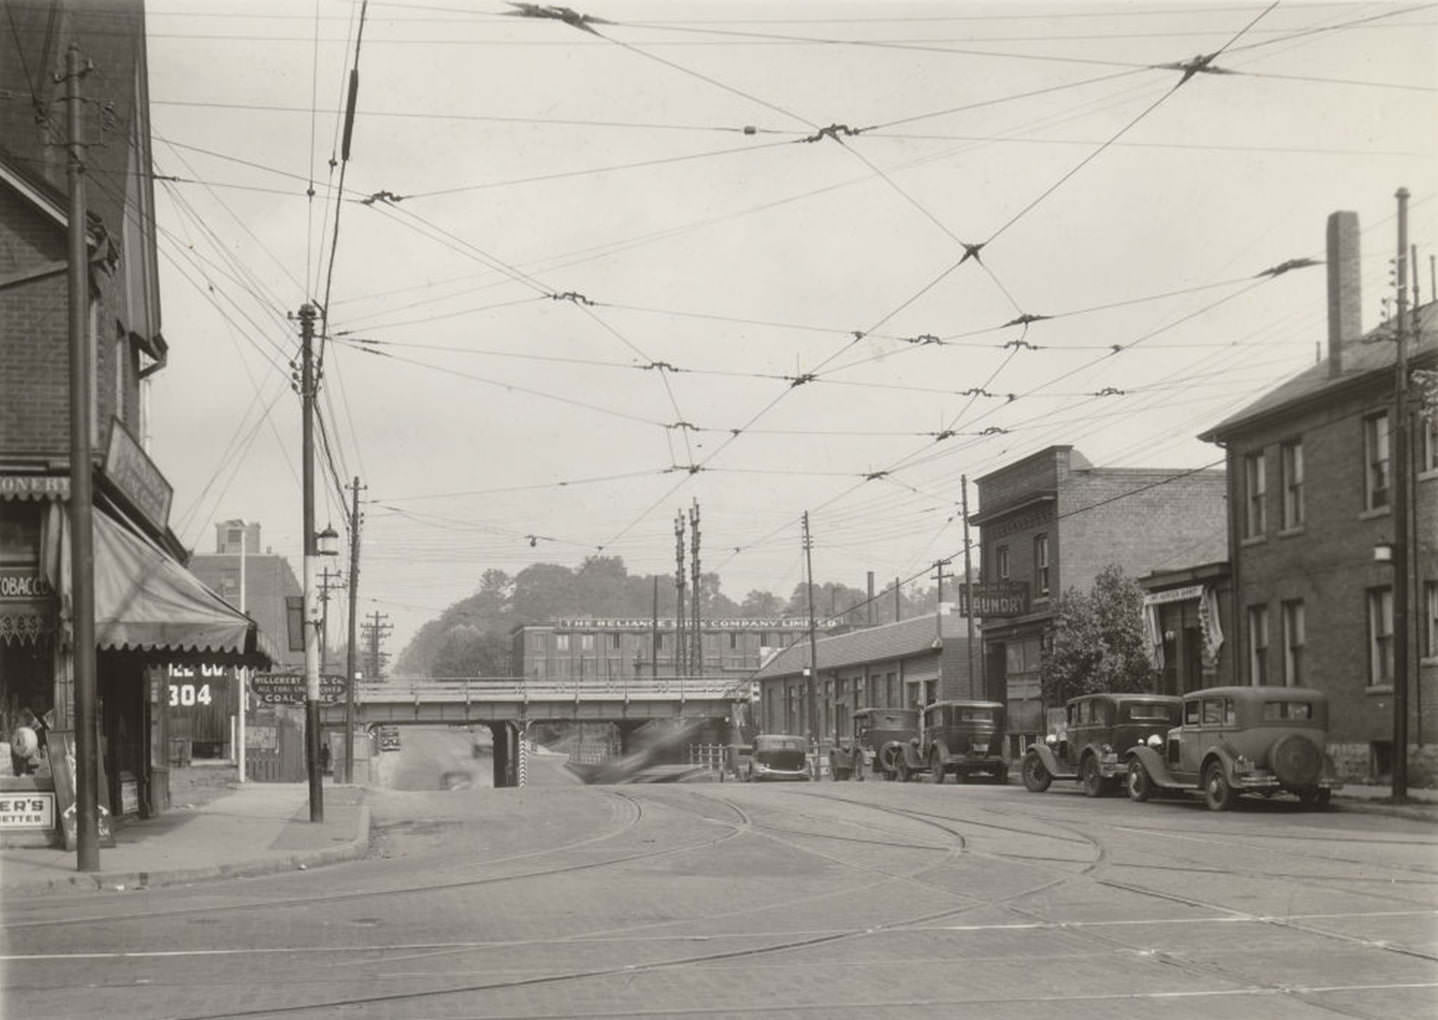 View looking north on Bathurst St. from Dupont St., 1929.